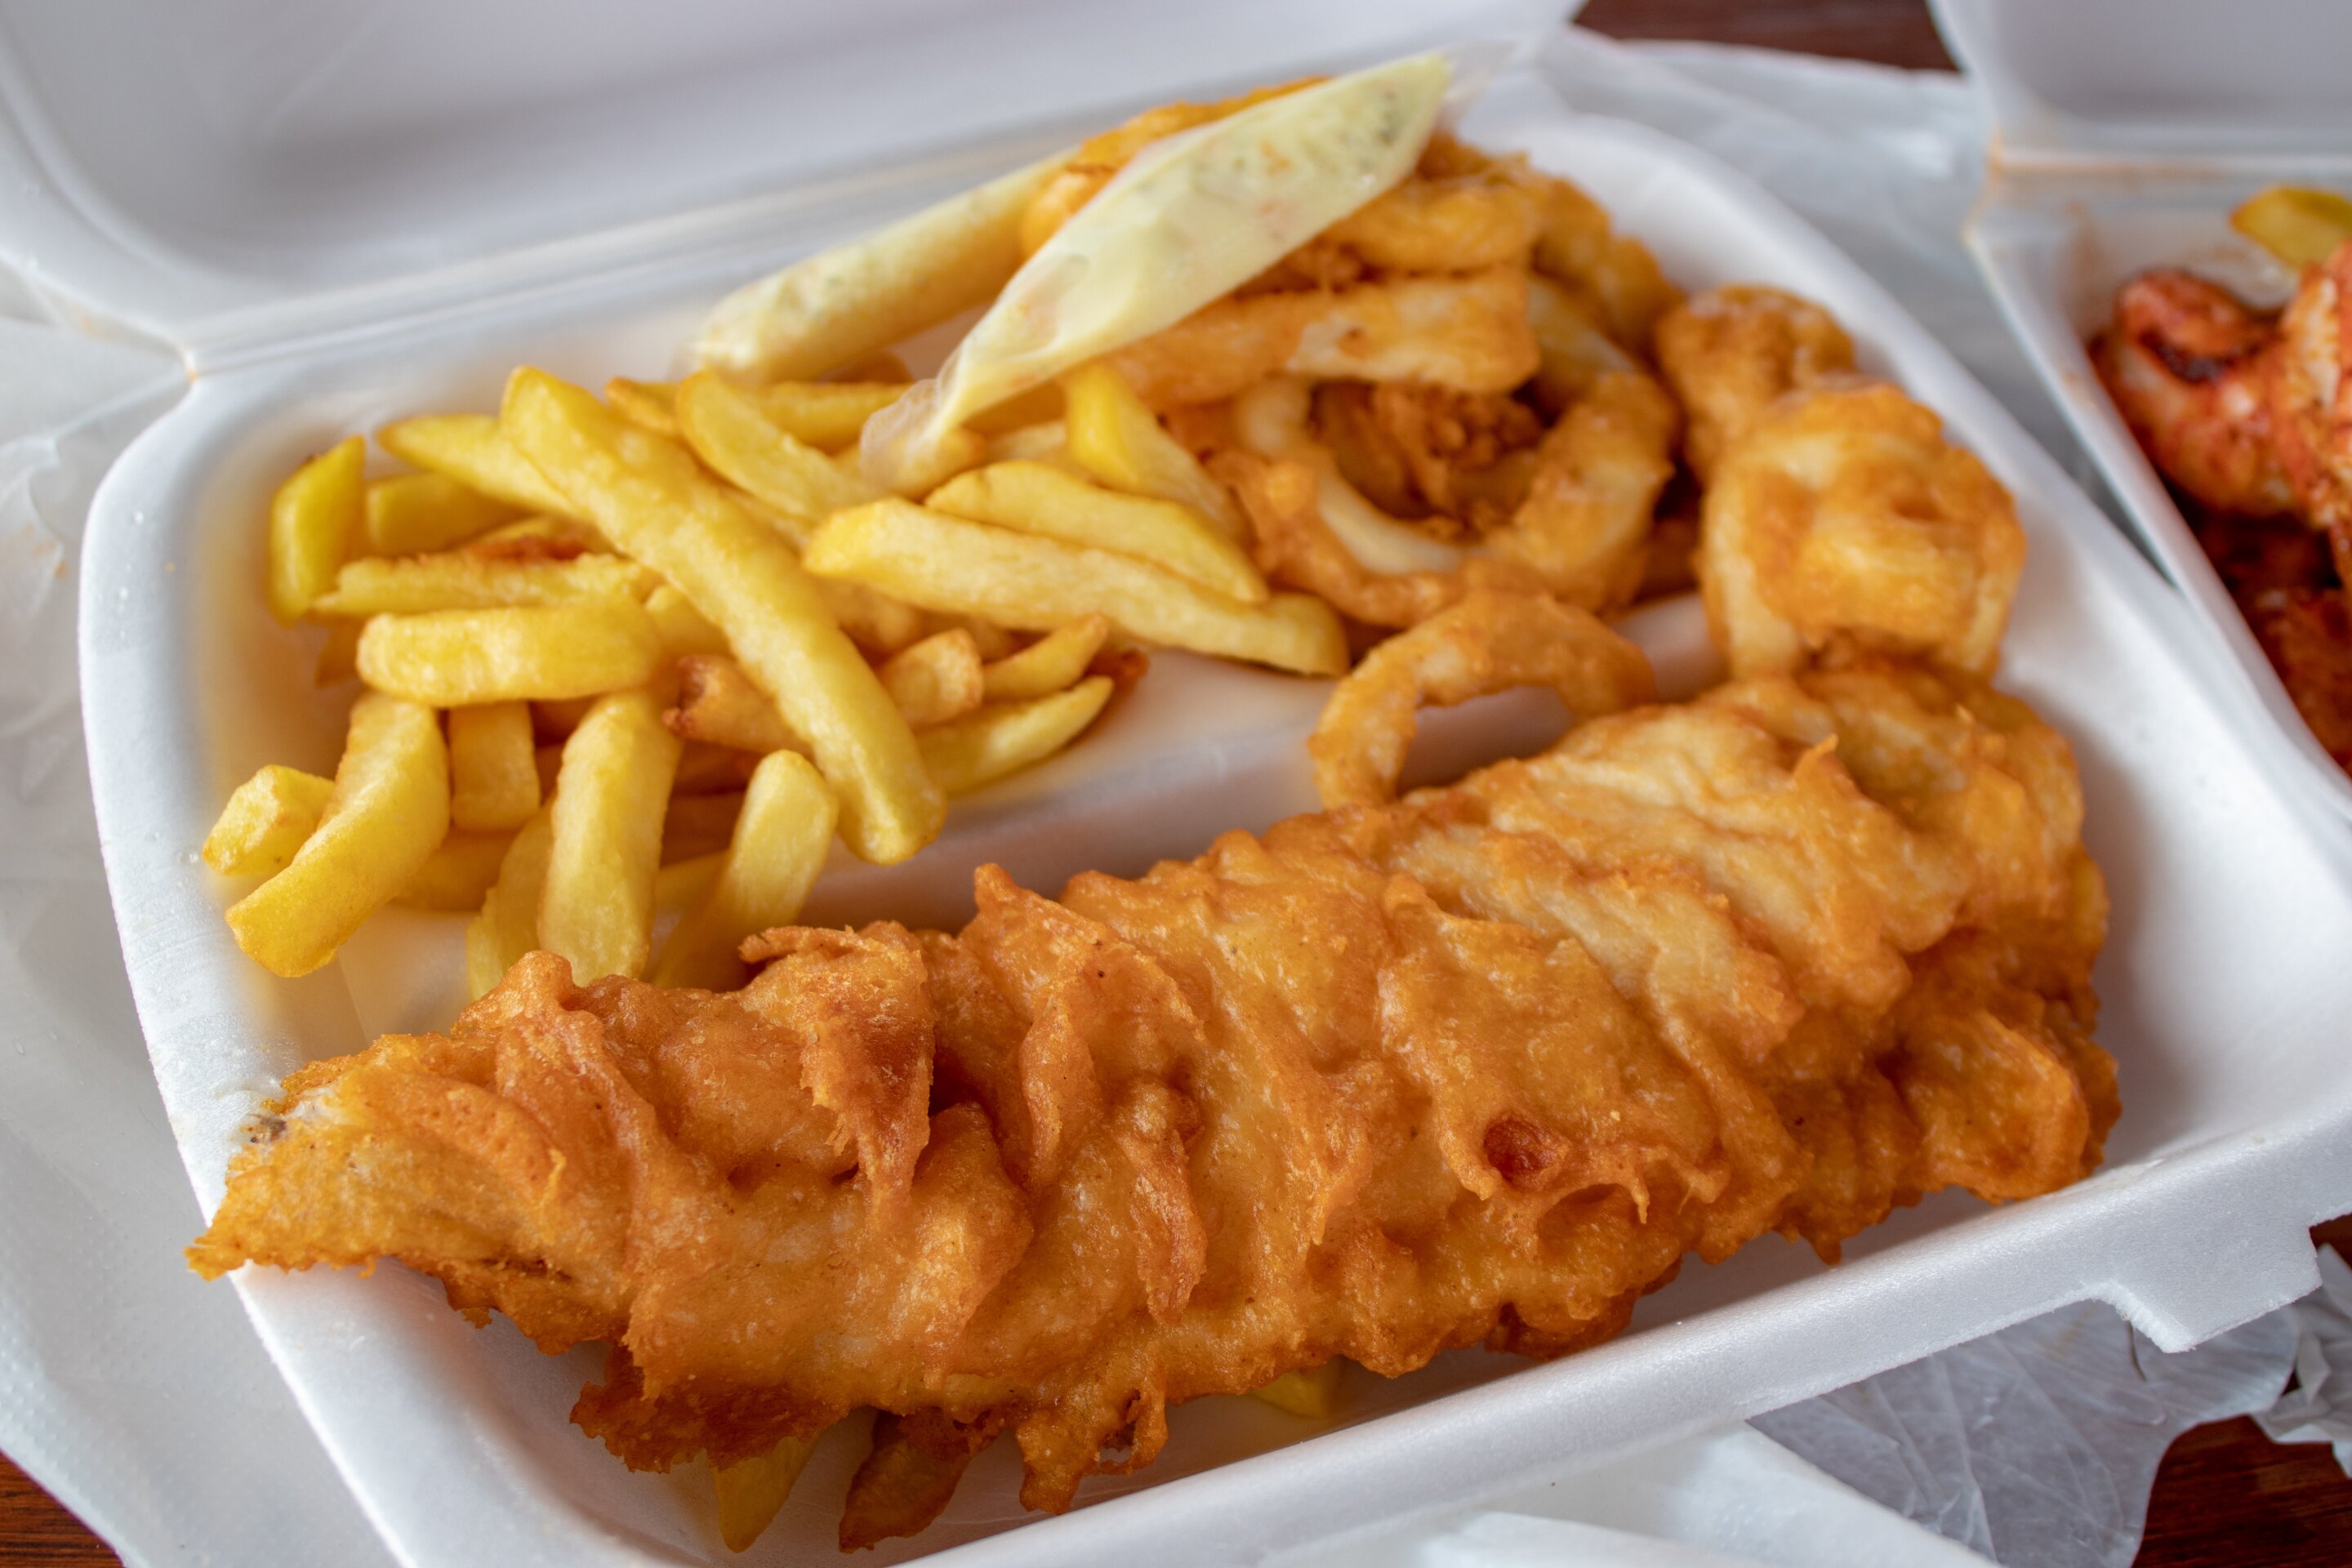 Most flake served in the humble fish and chip shop is mislabelled